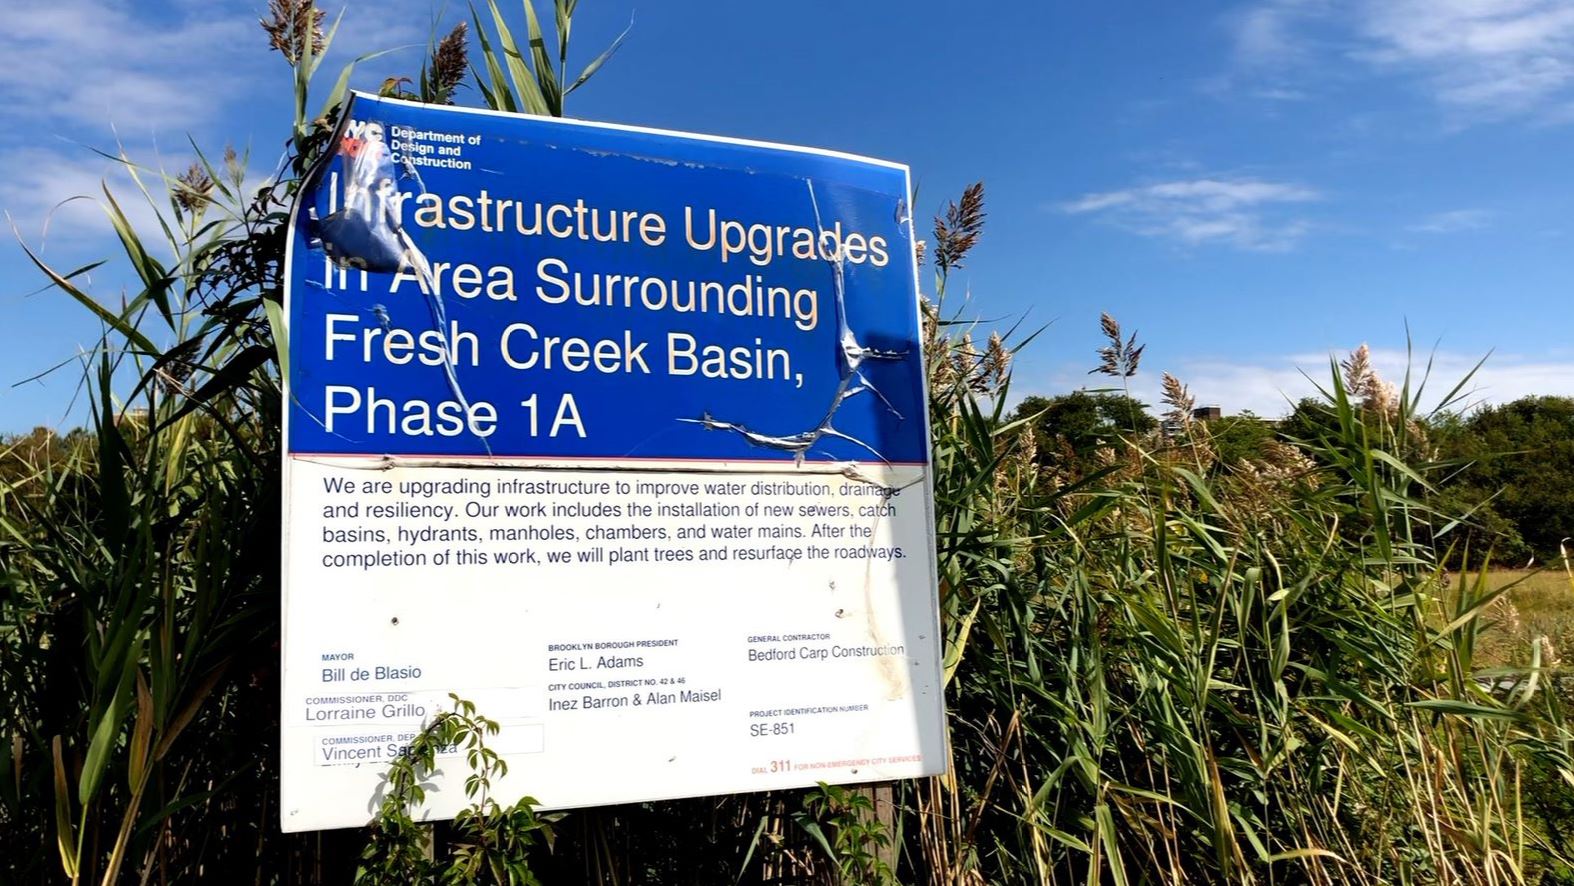 City signage provides information about infrastructure upgrades in Fresh Creek Basin. 